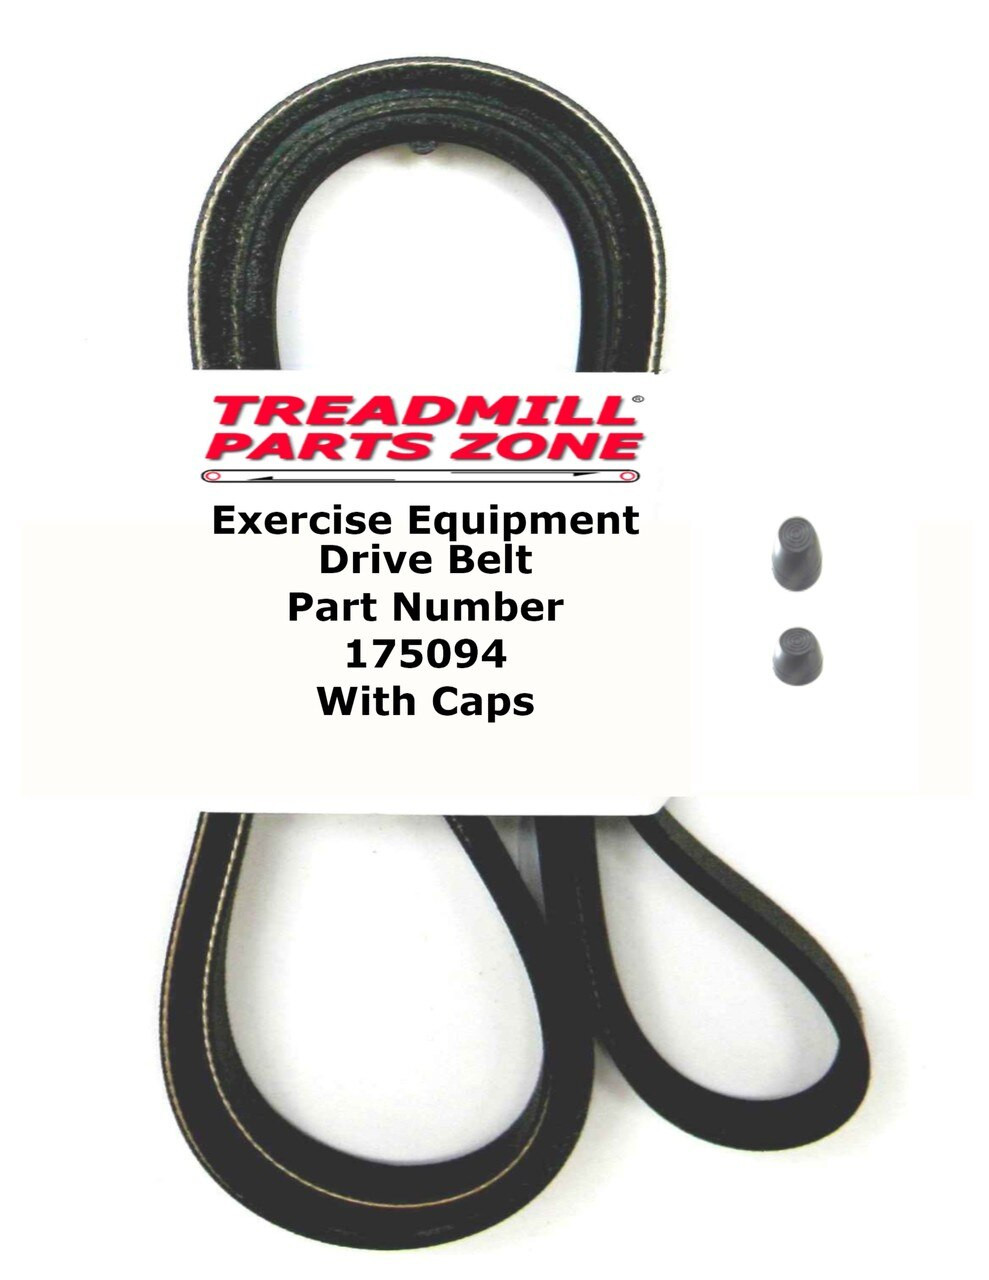 Elliptical Pulley Drive Belt with Axle Caps Part Number 175094